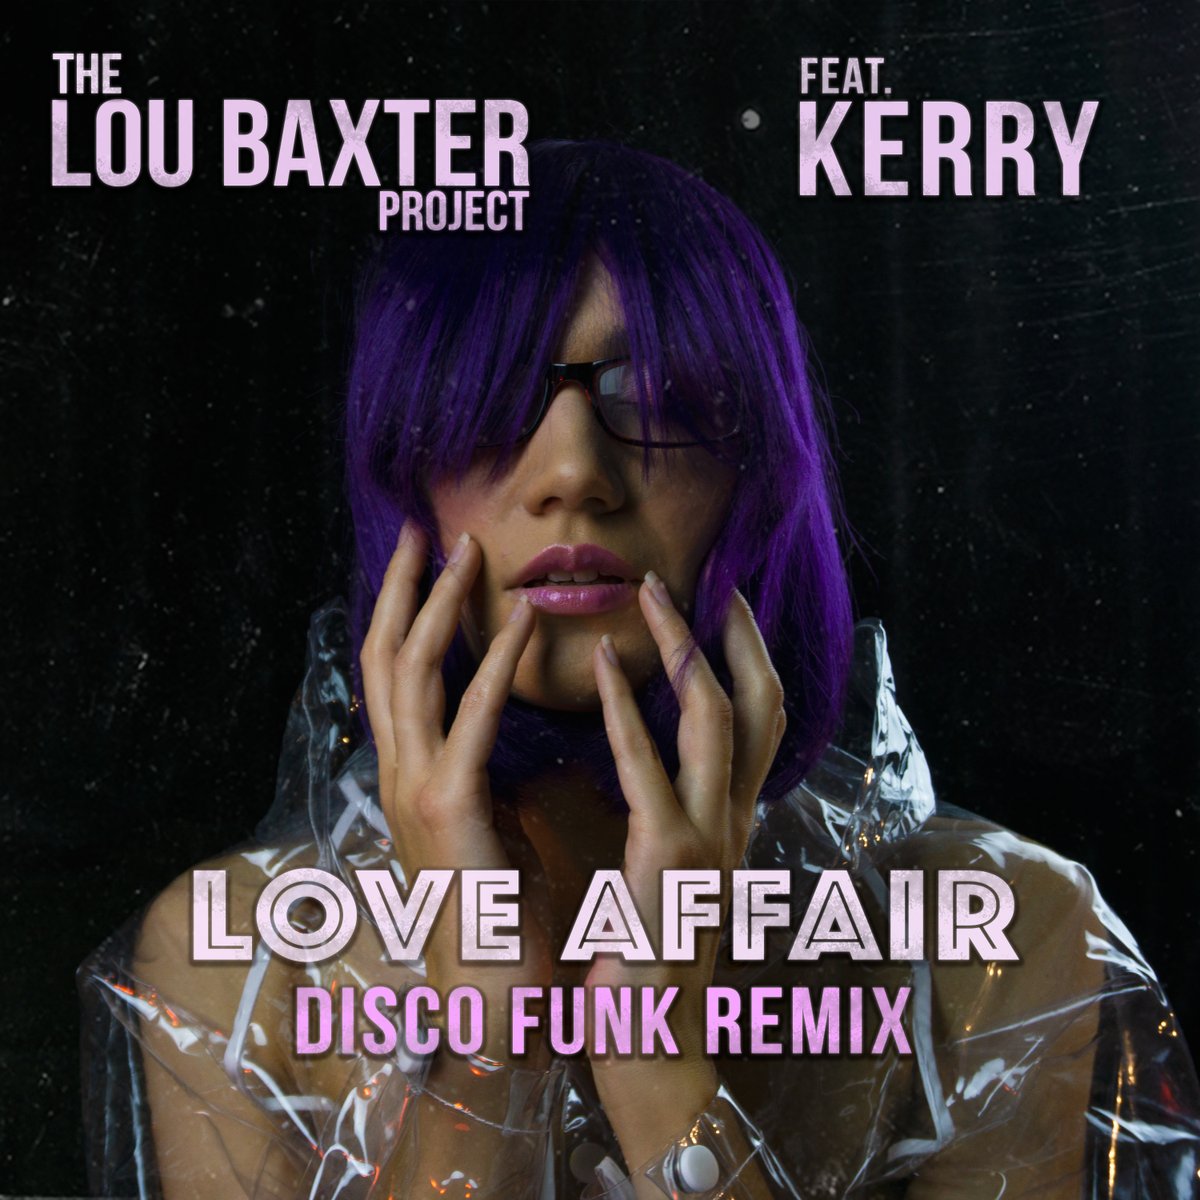 My #iwantmynas Thursday pick of the week is ‘Love affair’ by @KerryMusicbox & @The_Lou_Baxter because the modern funkpop banger is a real dancefloor filler! 🎵🪩

open.spotify.com/intl-de/track/…

@NAS_Spotlight @edeagle89 @MrOddzo #songoftheday #funkmusic #musicislife #newmusic #funkpop